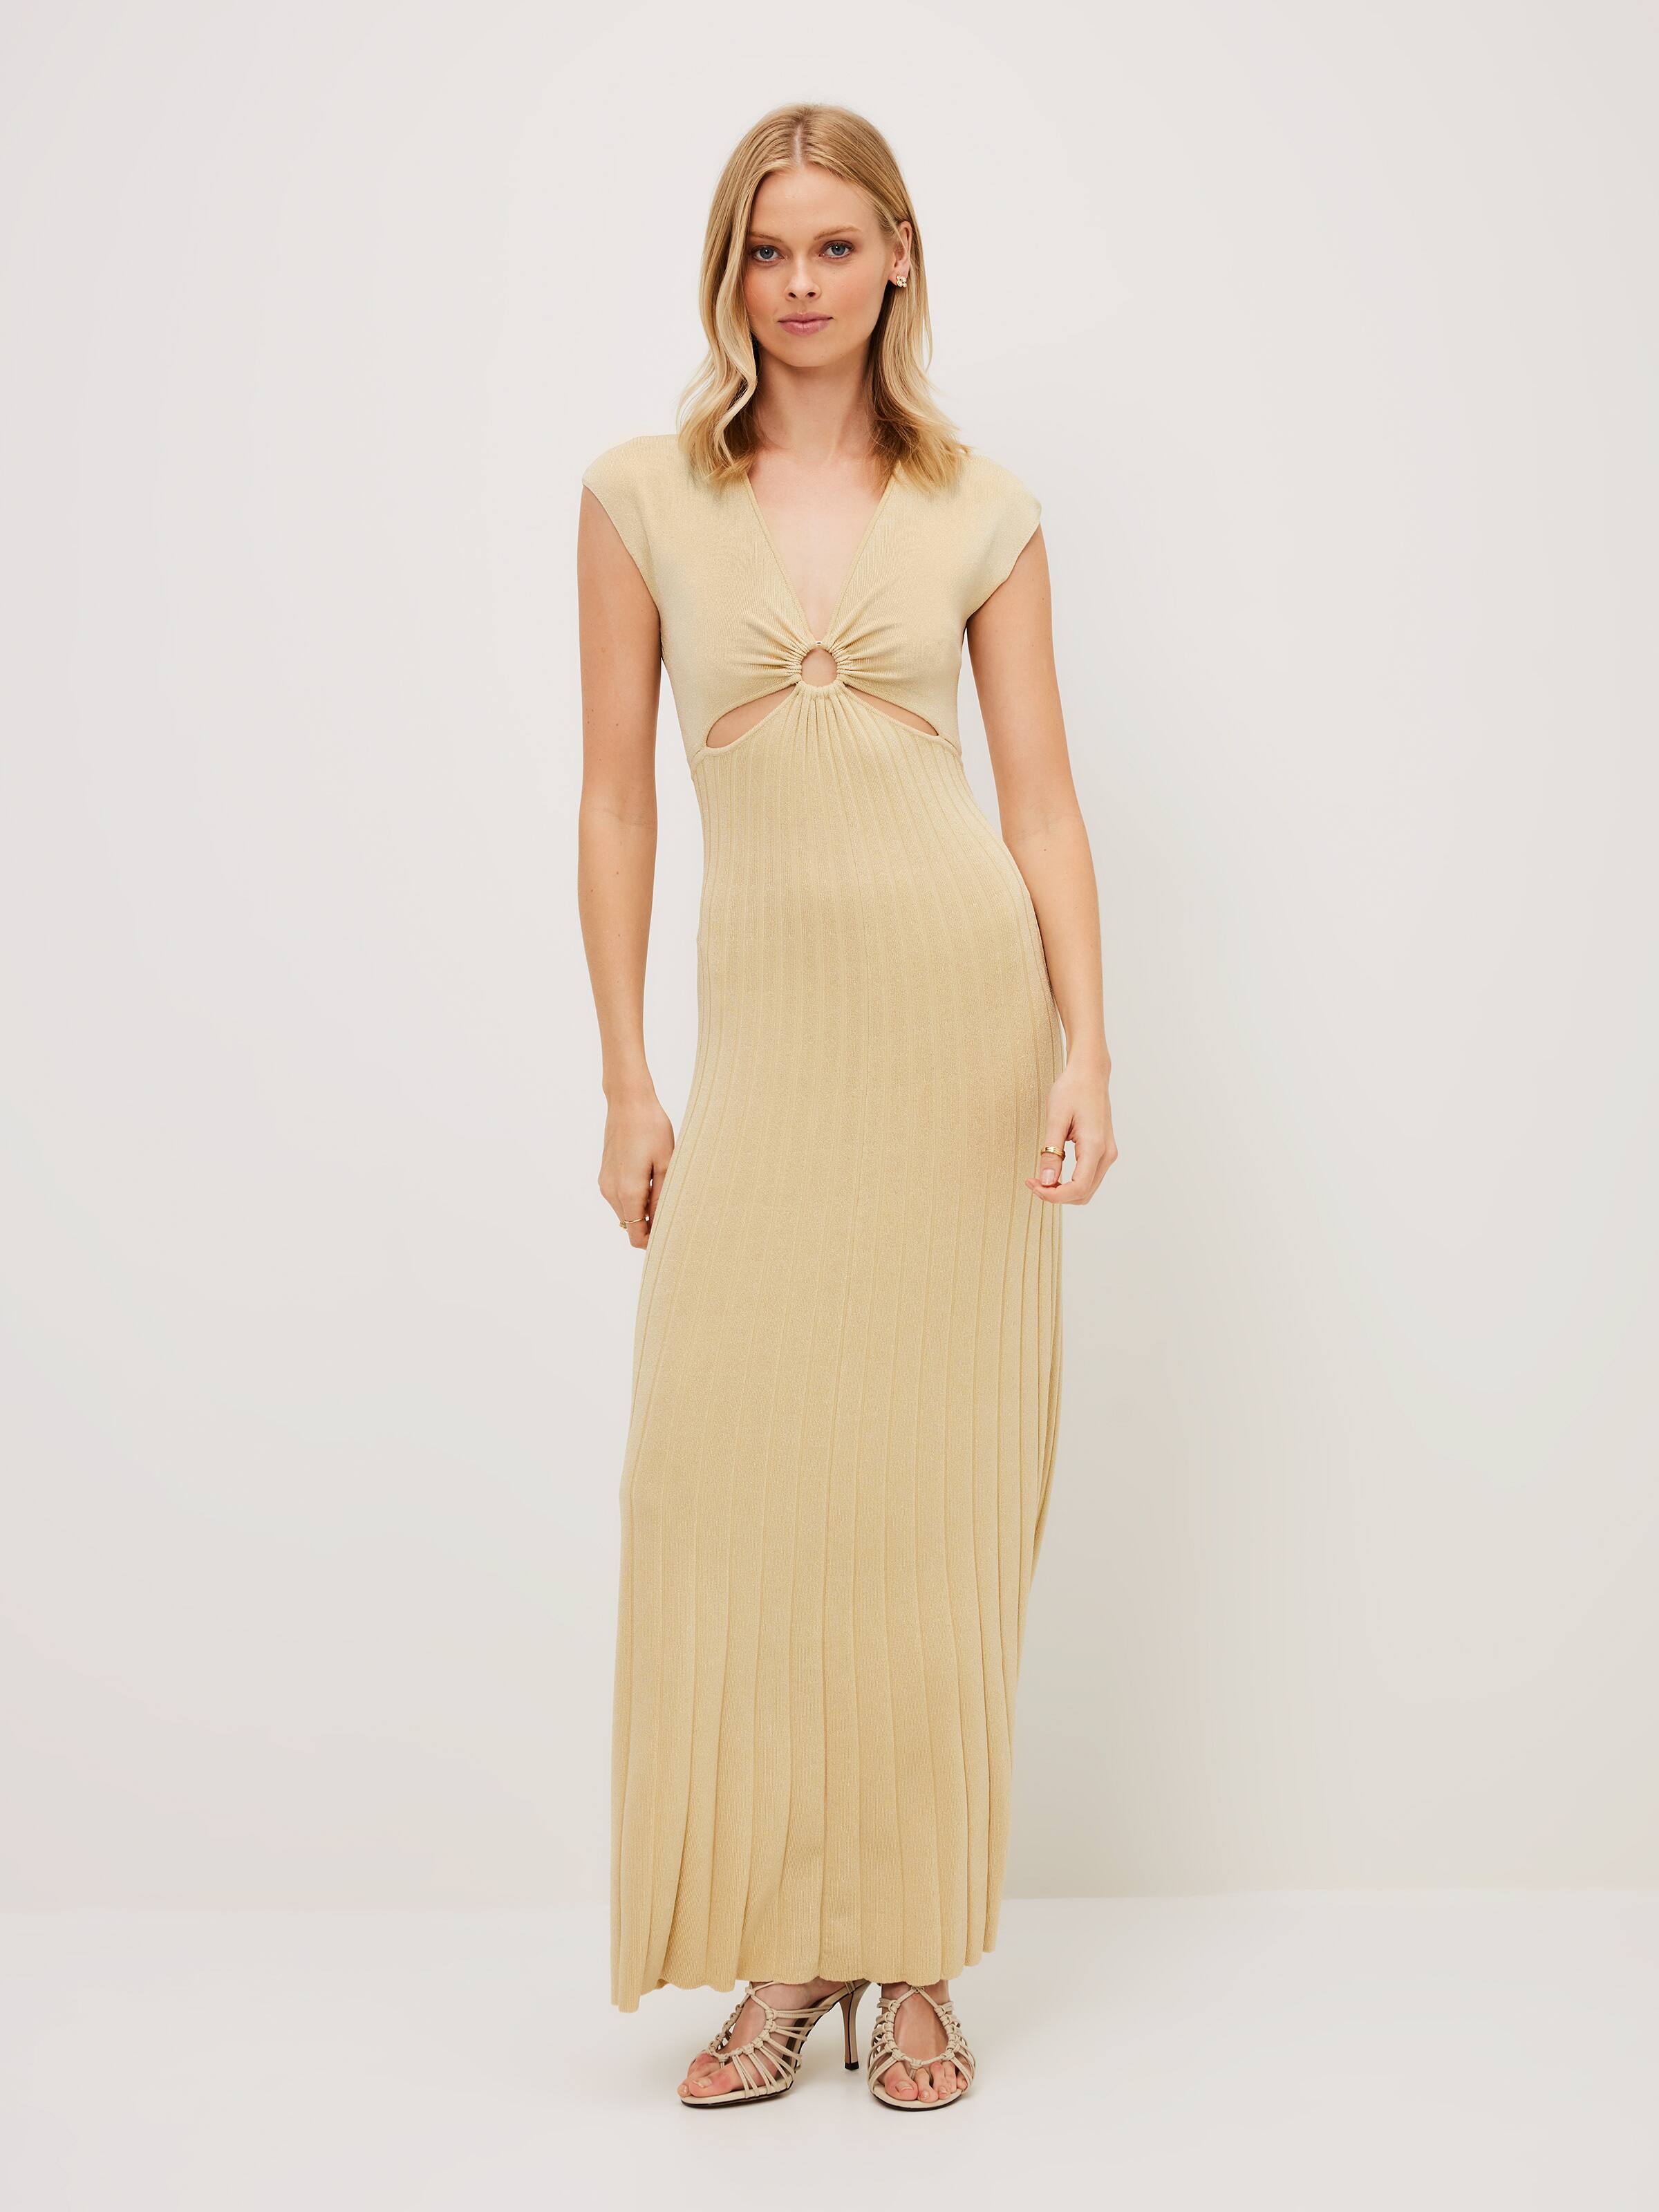 20+ Evening Dresses That Will Be Perfect For A Formal Christmas